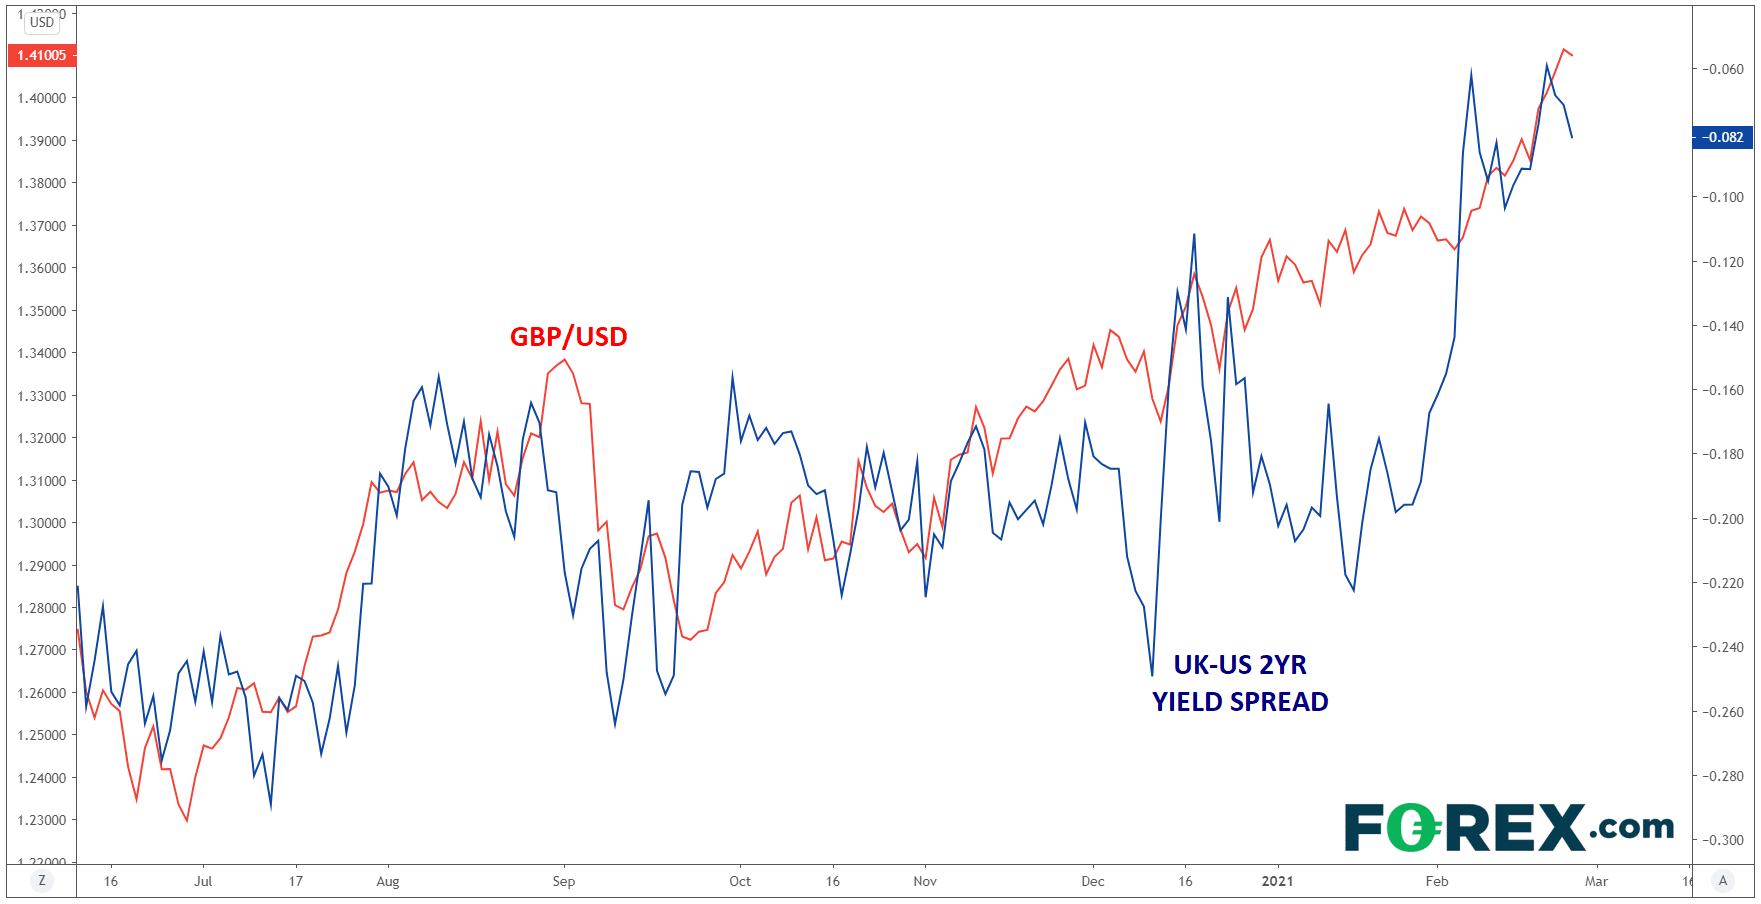 Yield differentials dictate direction in GBPUSD